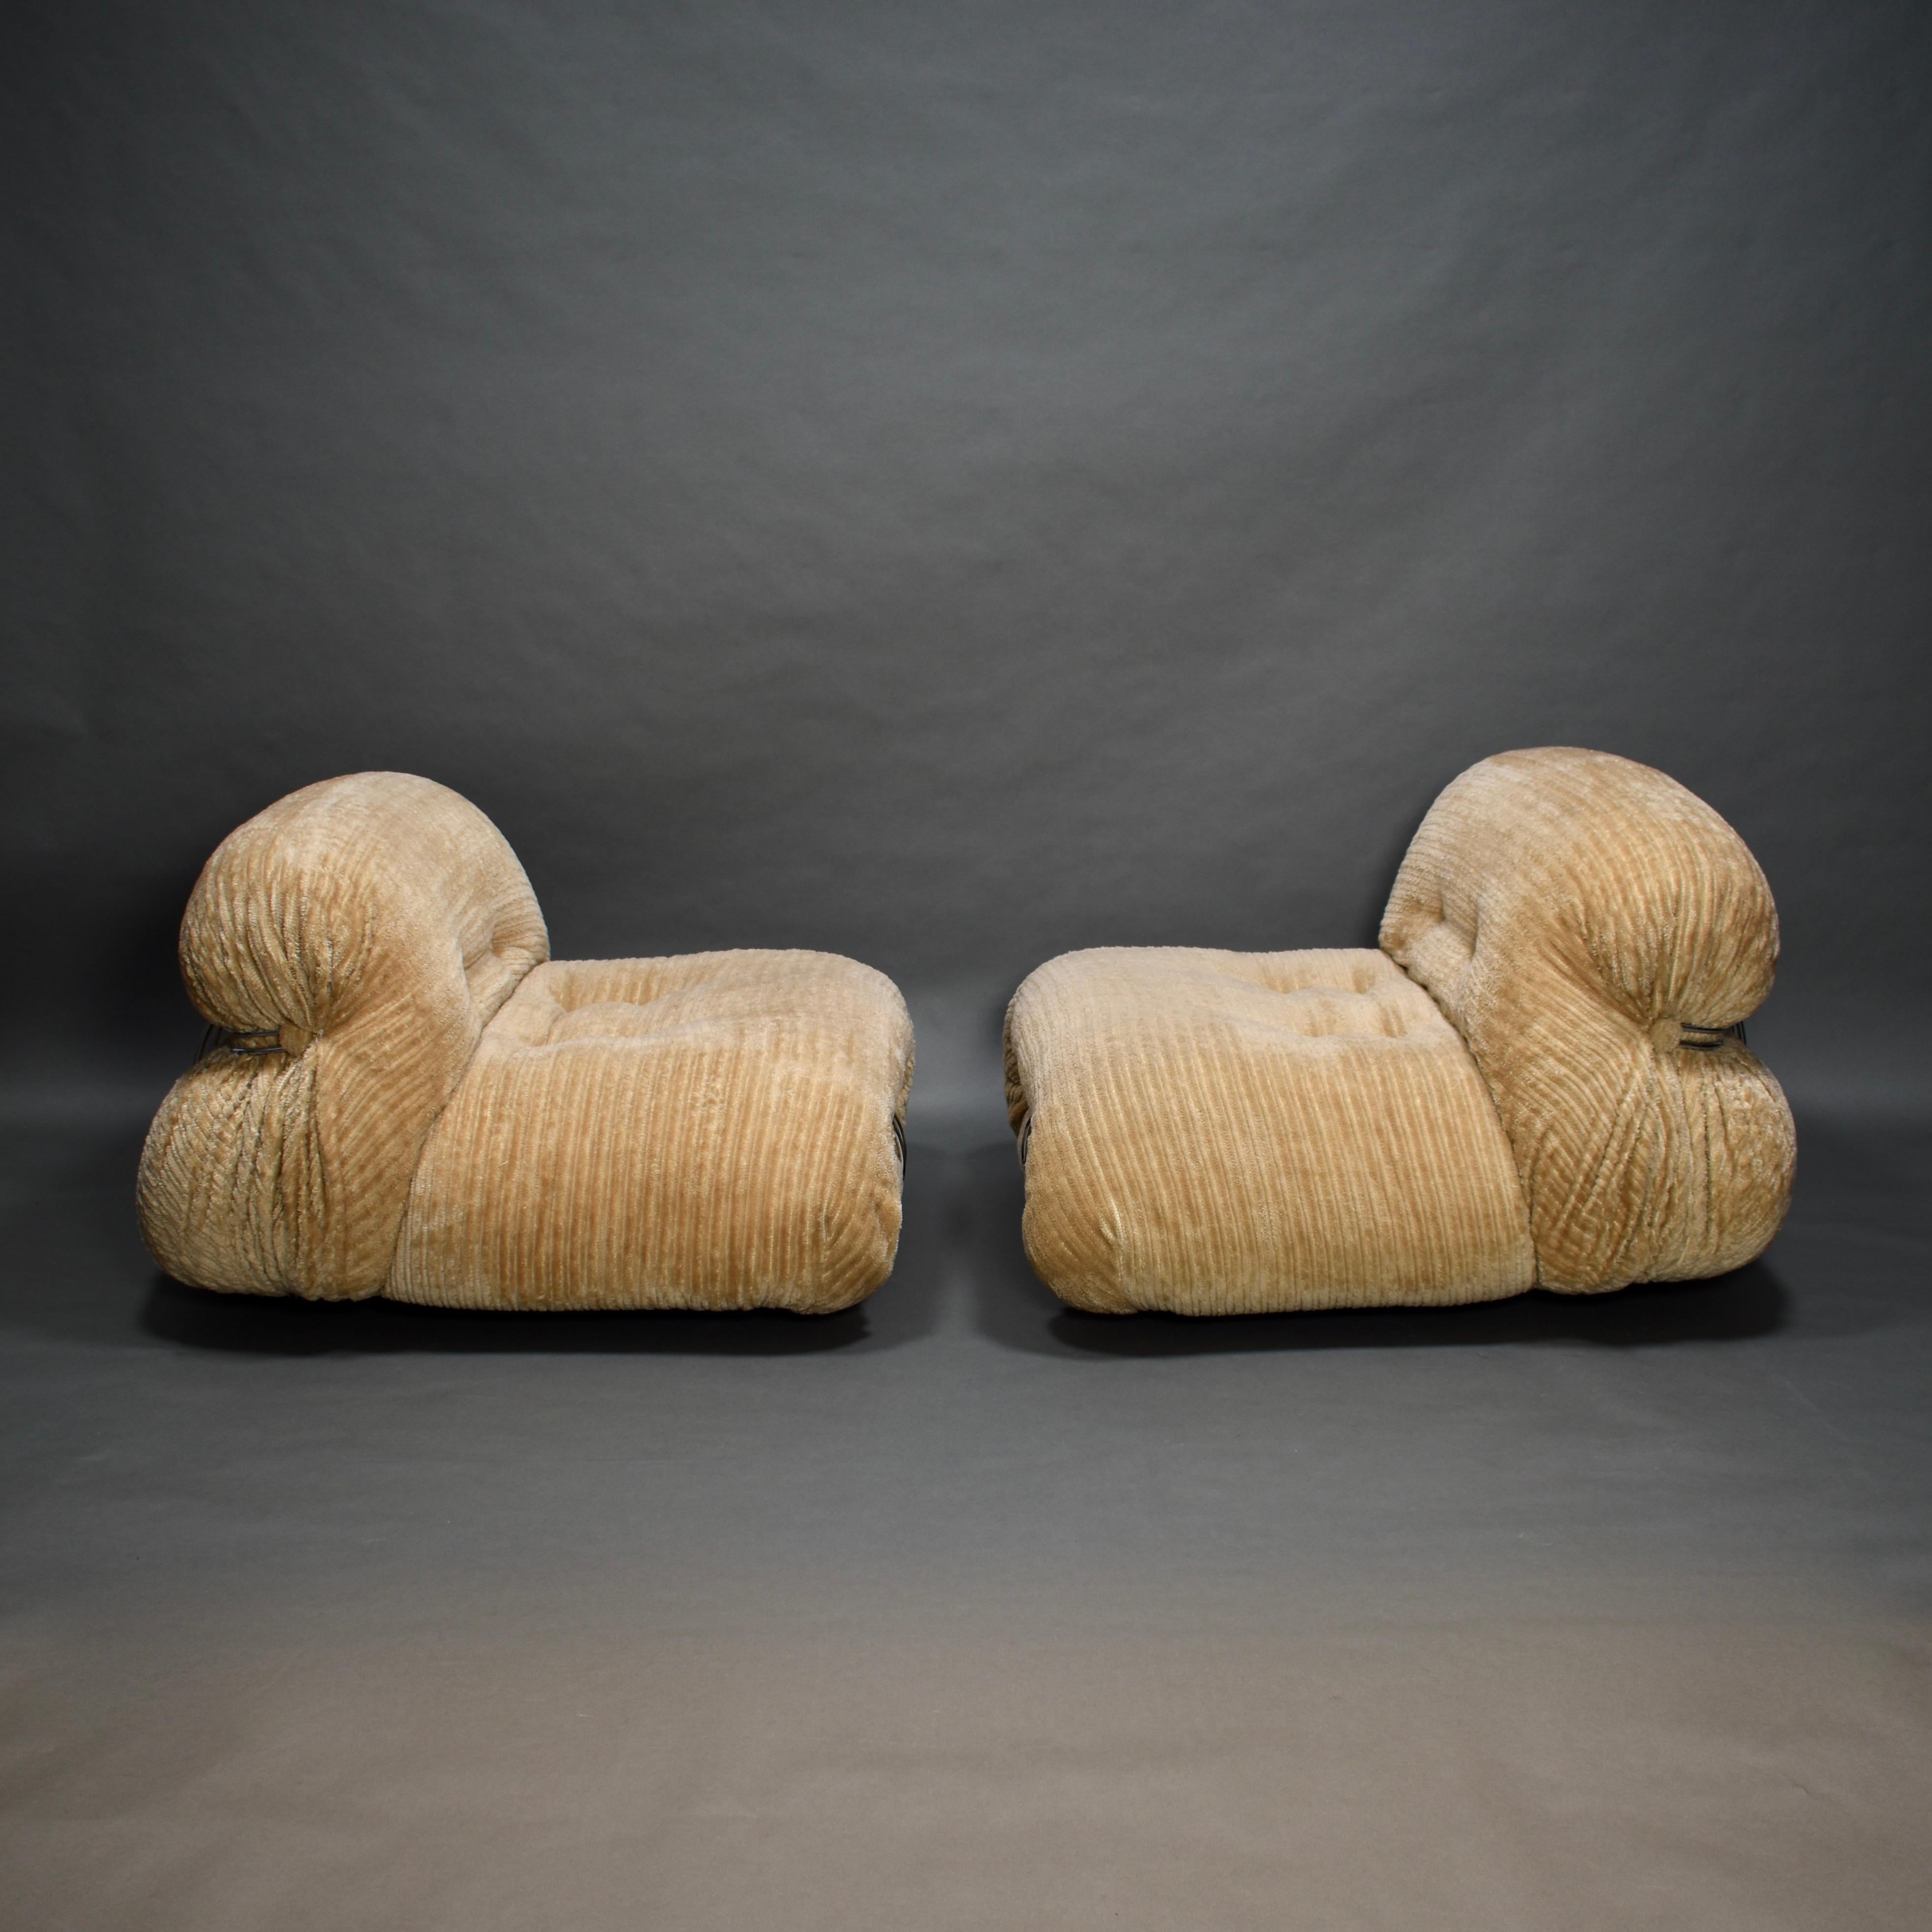 Fabric Pair of Soriana Chairs by Afra and Tobia Scarpa for Cassina, Italy, circa 1970